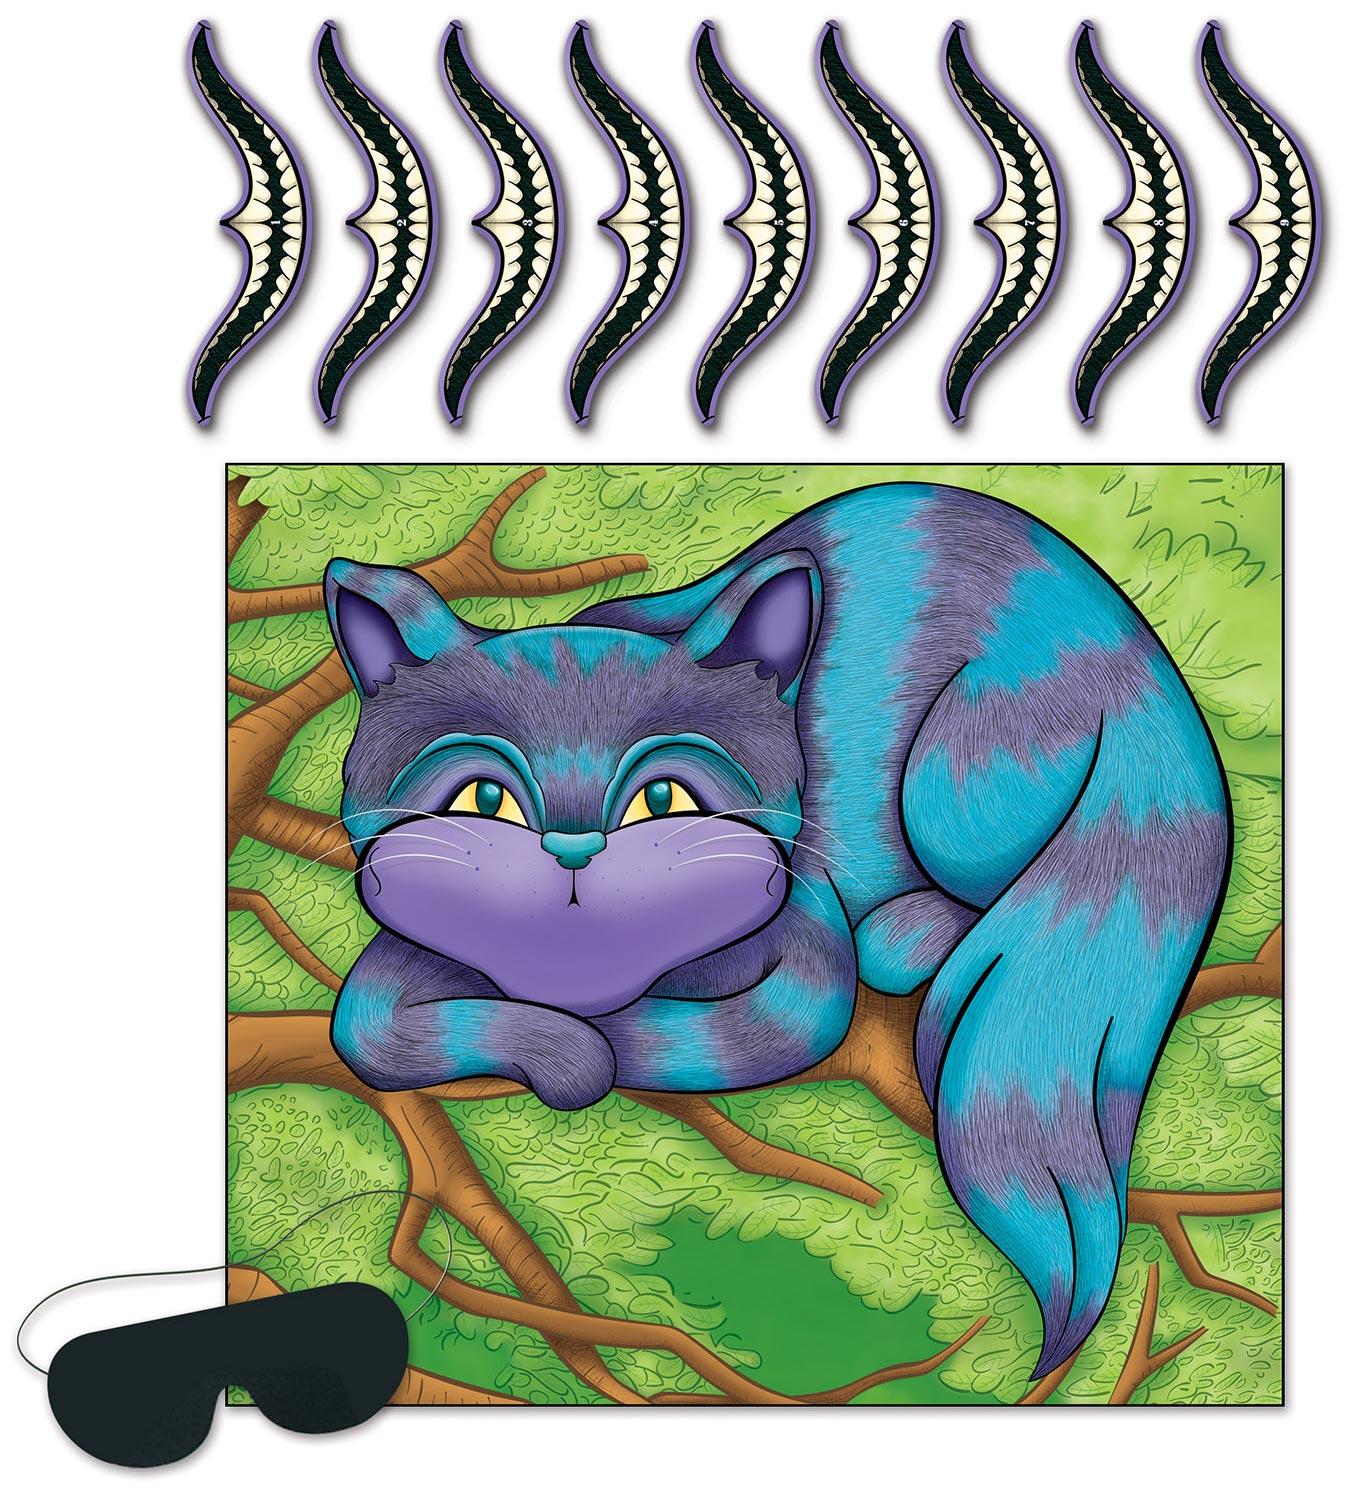 Alice in Wonderland Cheshire Cat Party Game by Beistle 60063 available in the UK here at Karnival Costumes online party shop